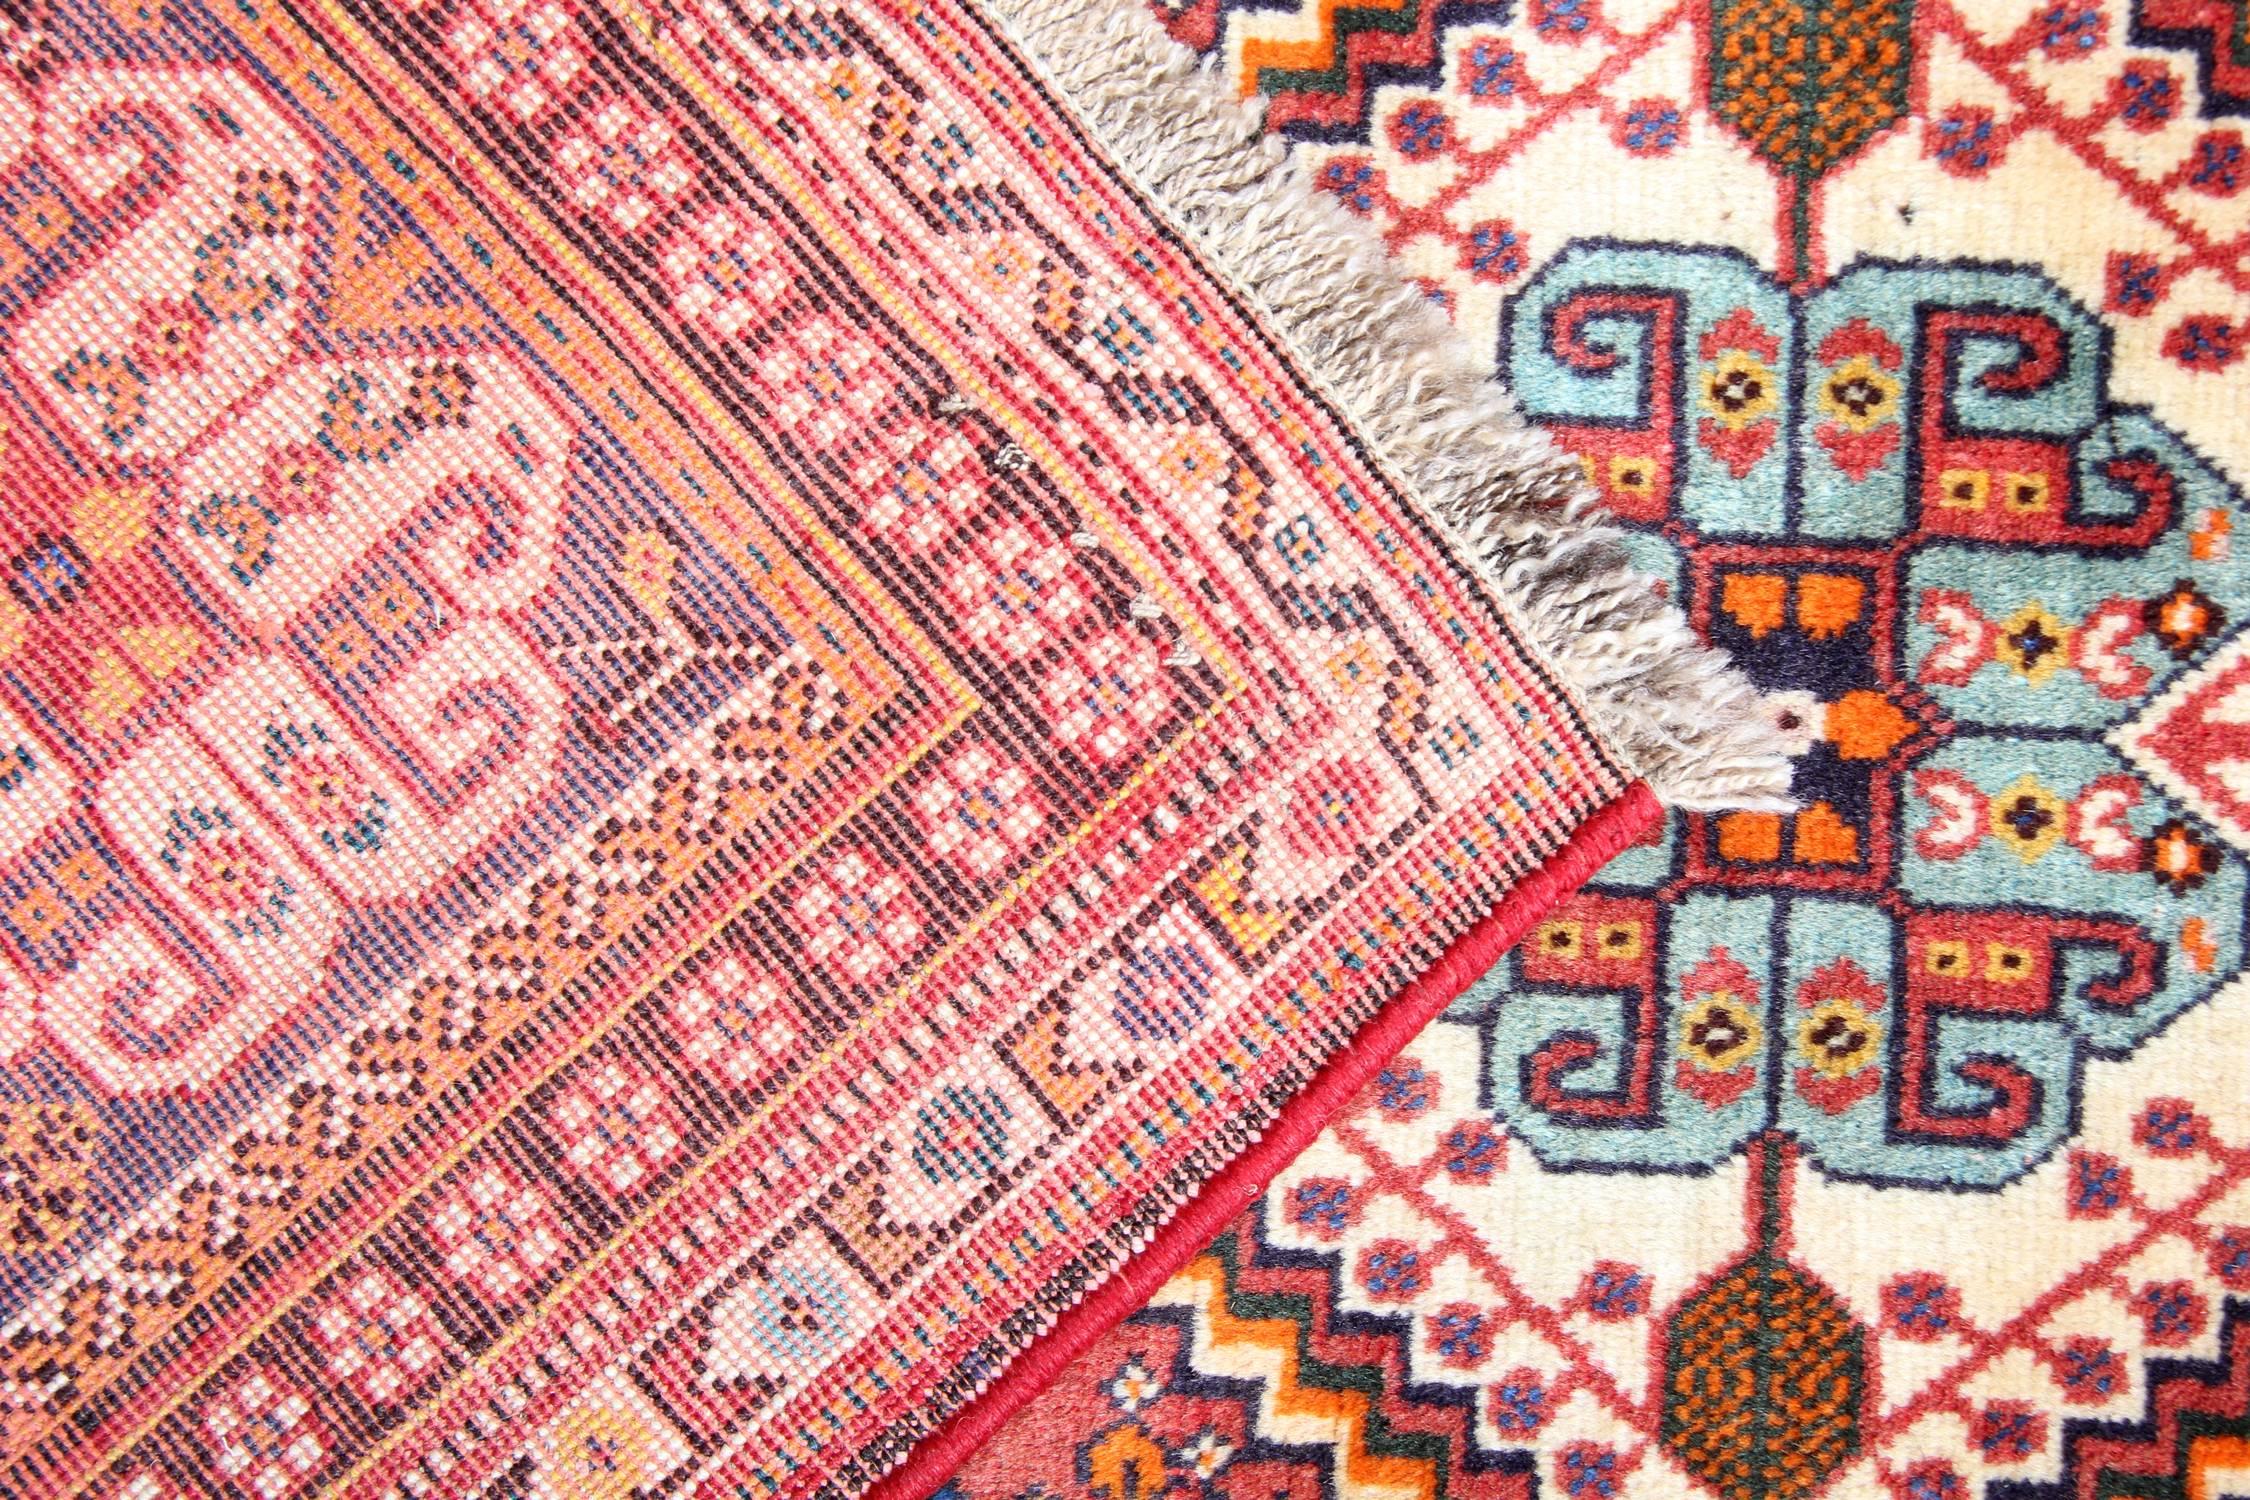 This fine wool rug was handwoven in 1960 it features a highly detailed tribal design. Woven on a red field accents of beige cream and blue have been used to create beautiful diamond central medallions. Surrounded by floating motifs and intricate